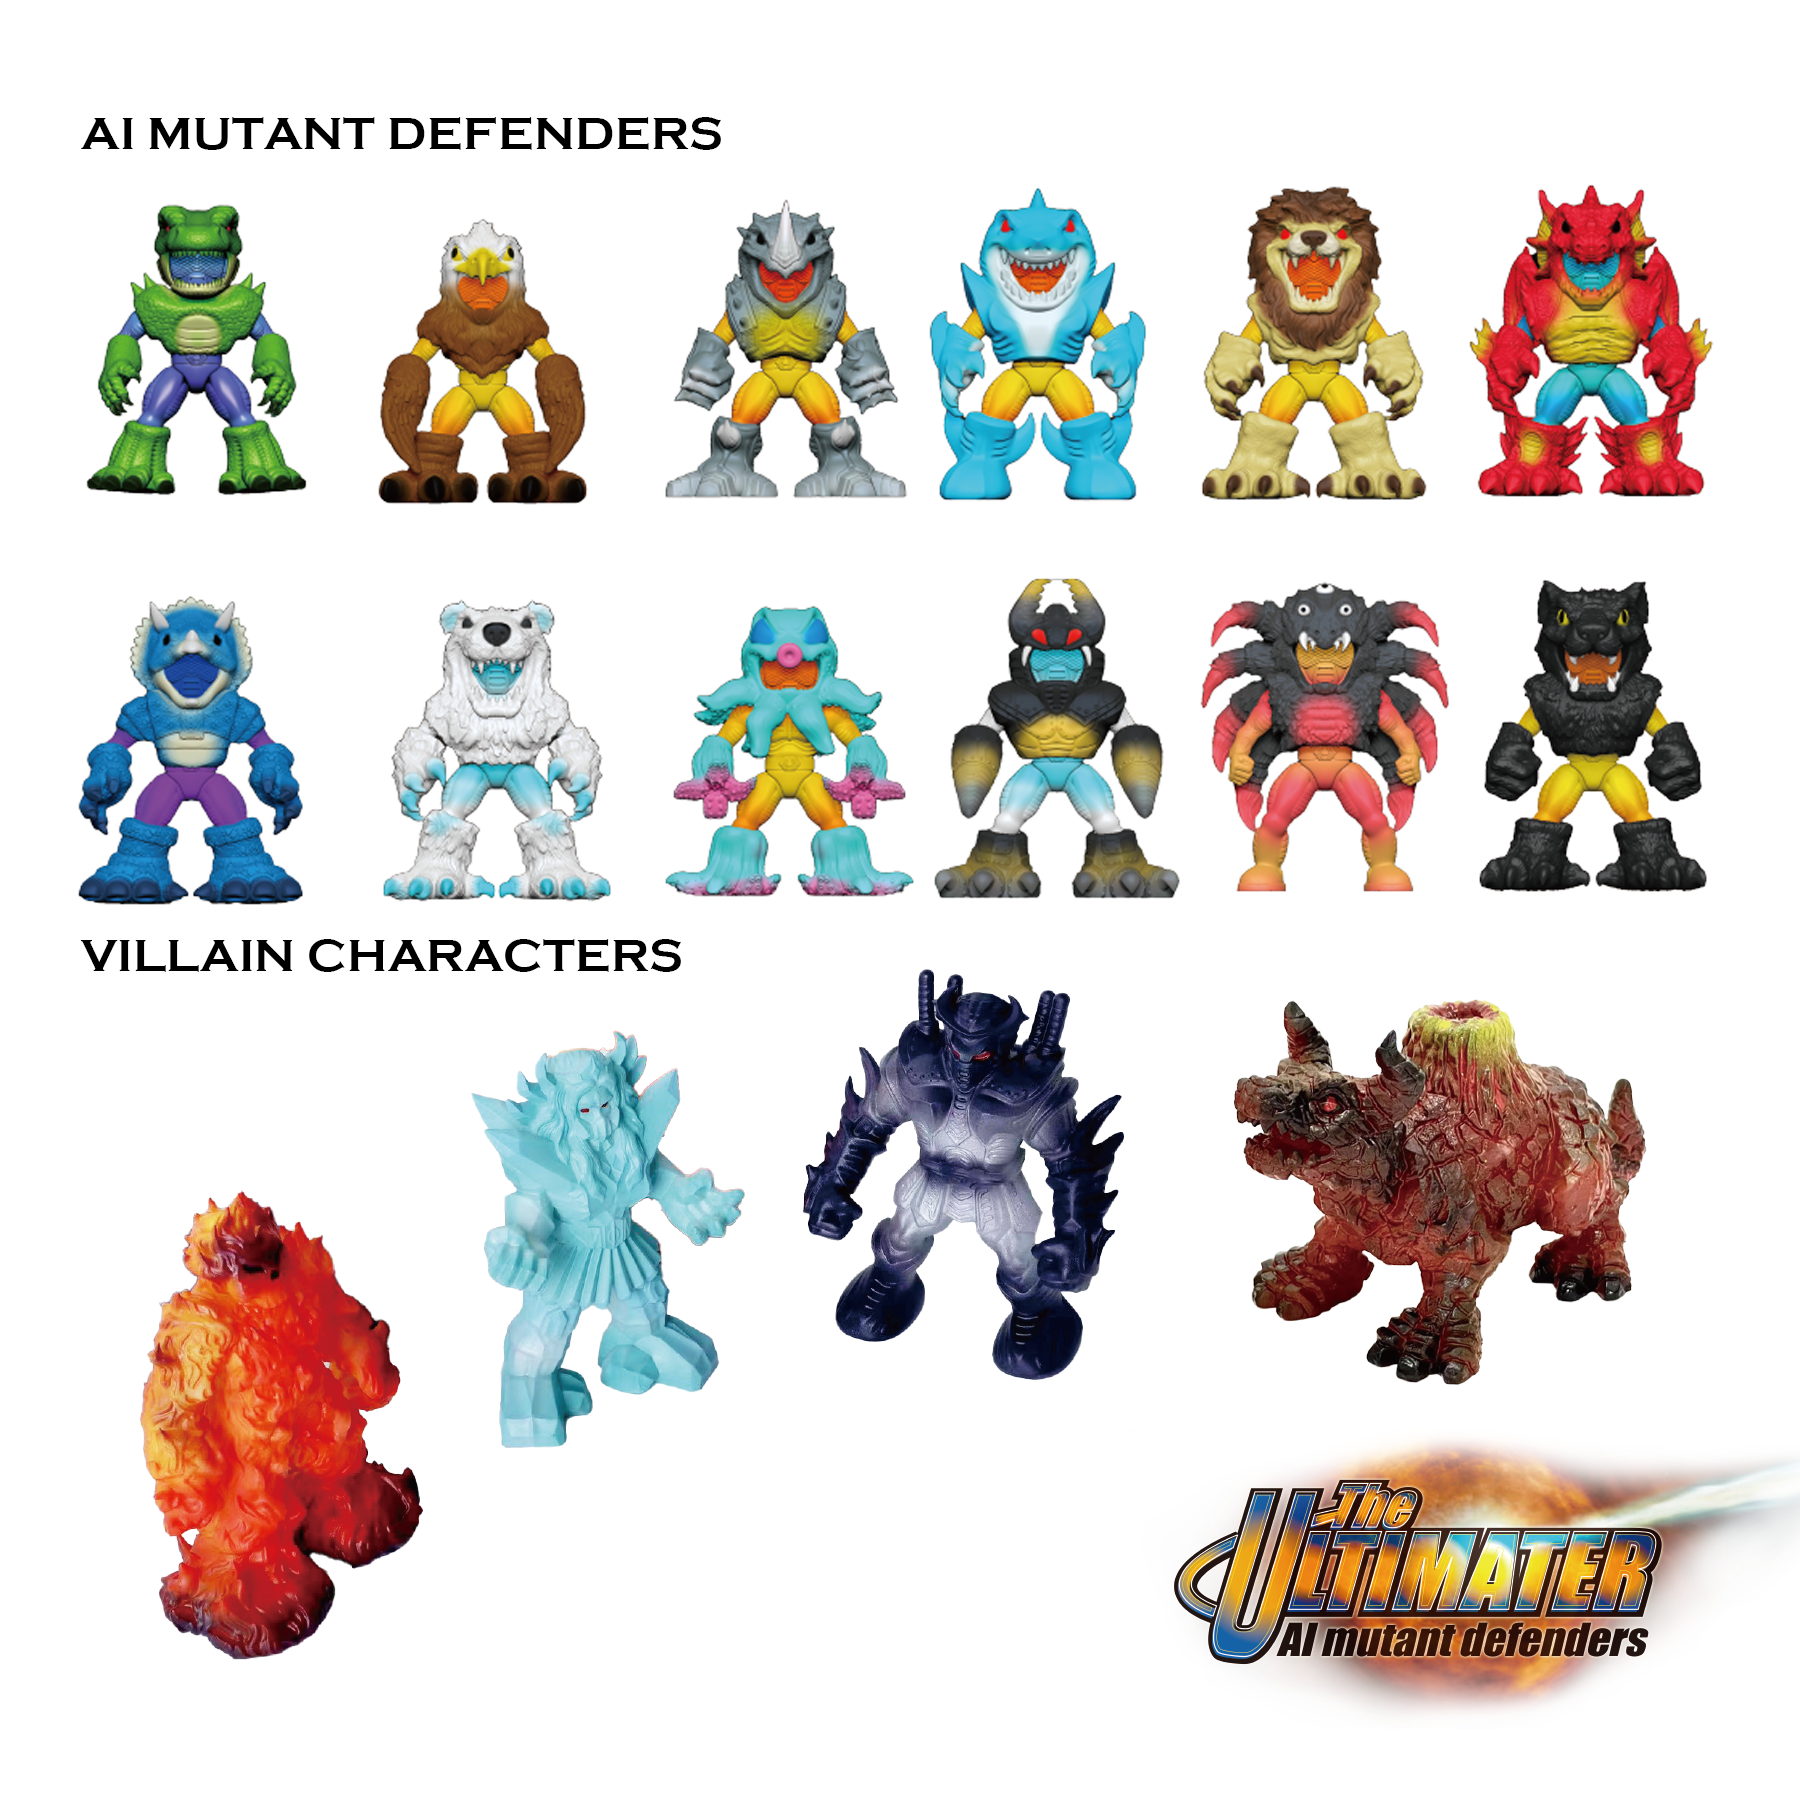 The Ultimater AI Mutant Defenders and Villain Characters F5148-1RWD